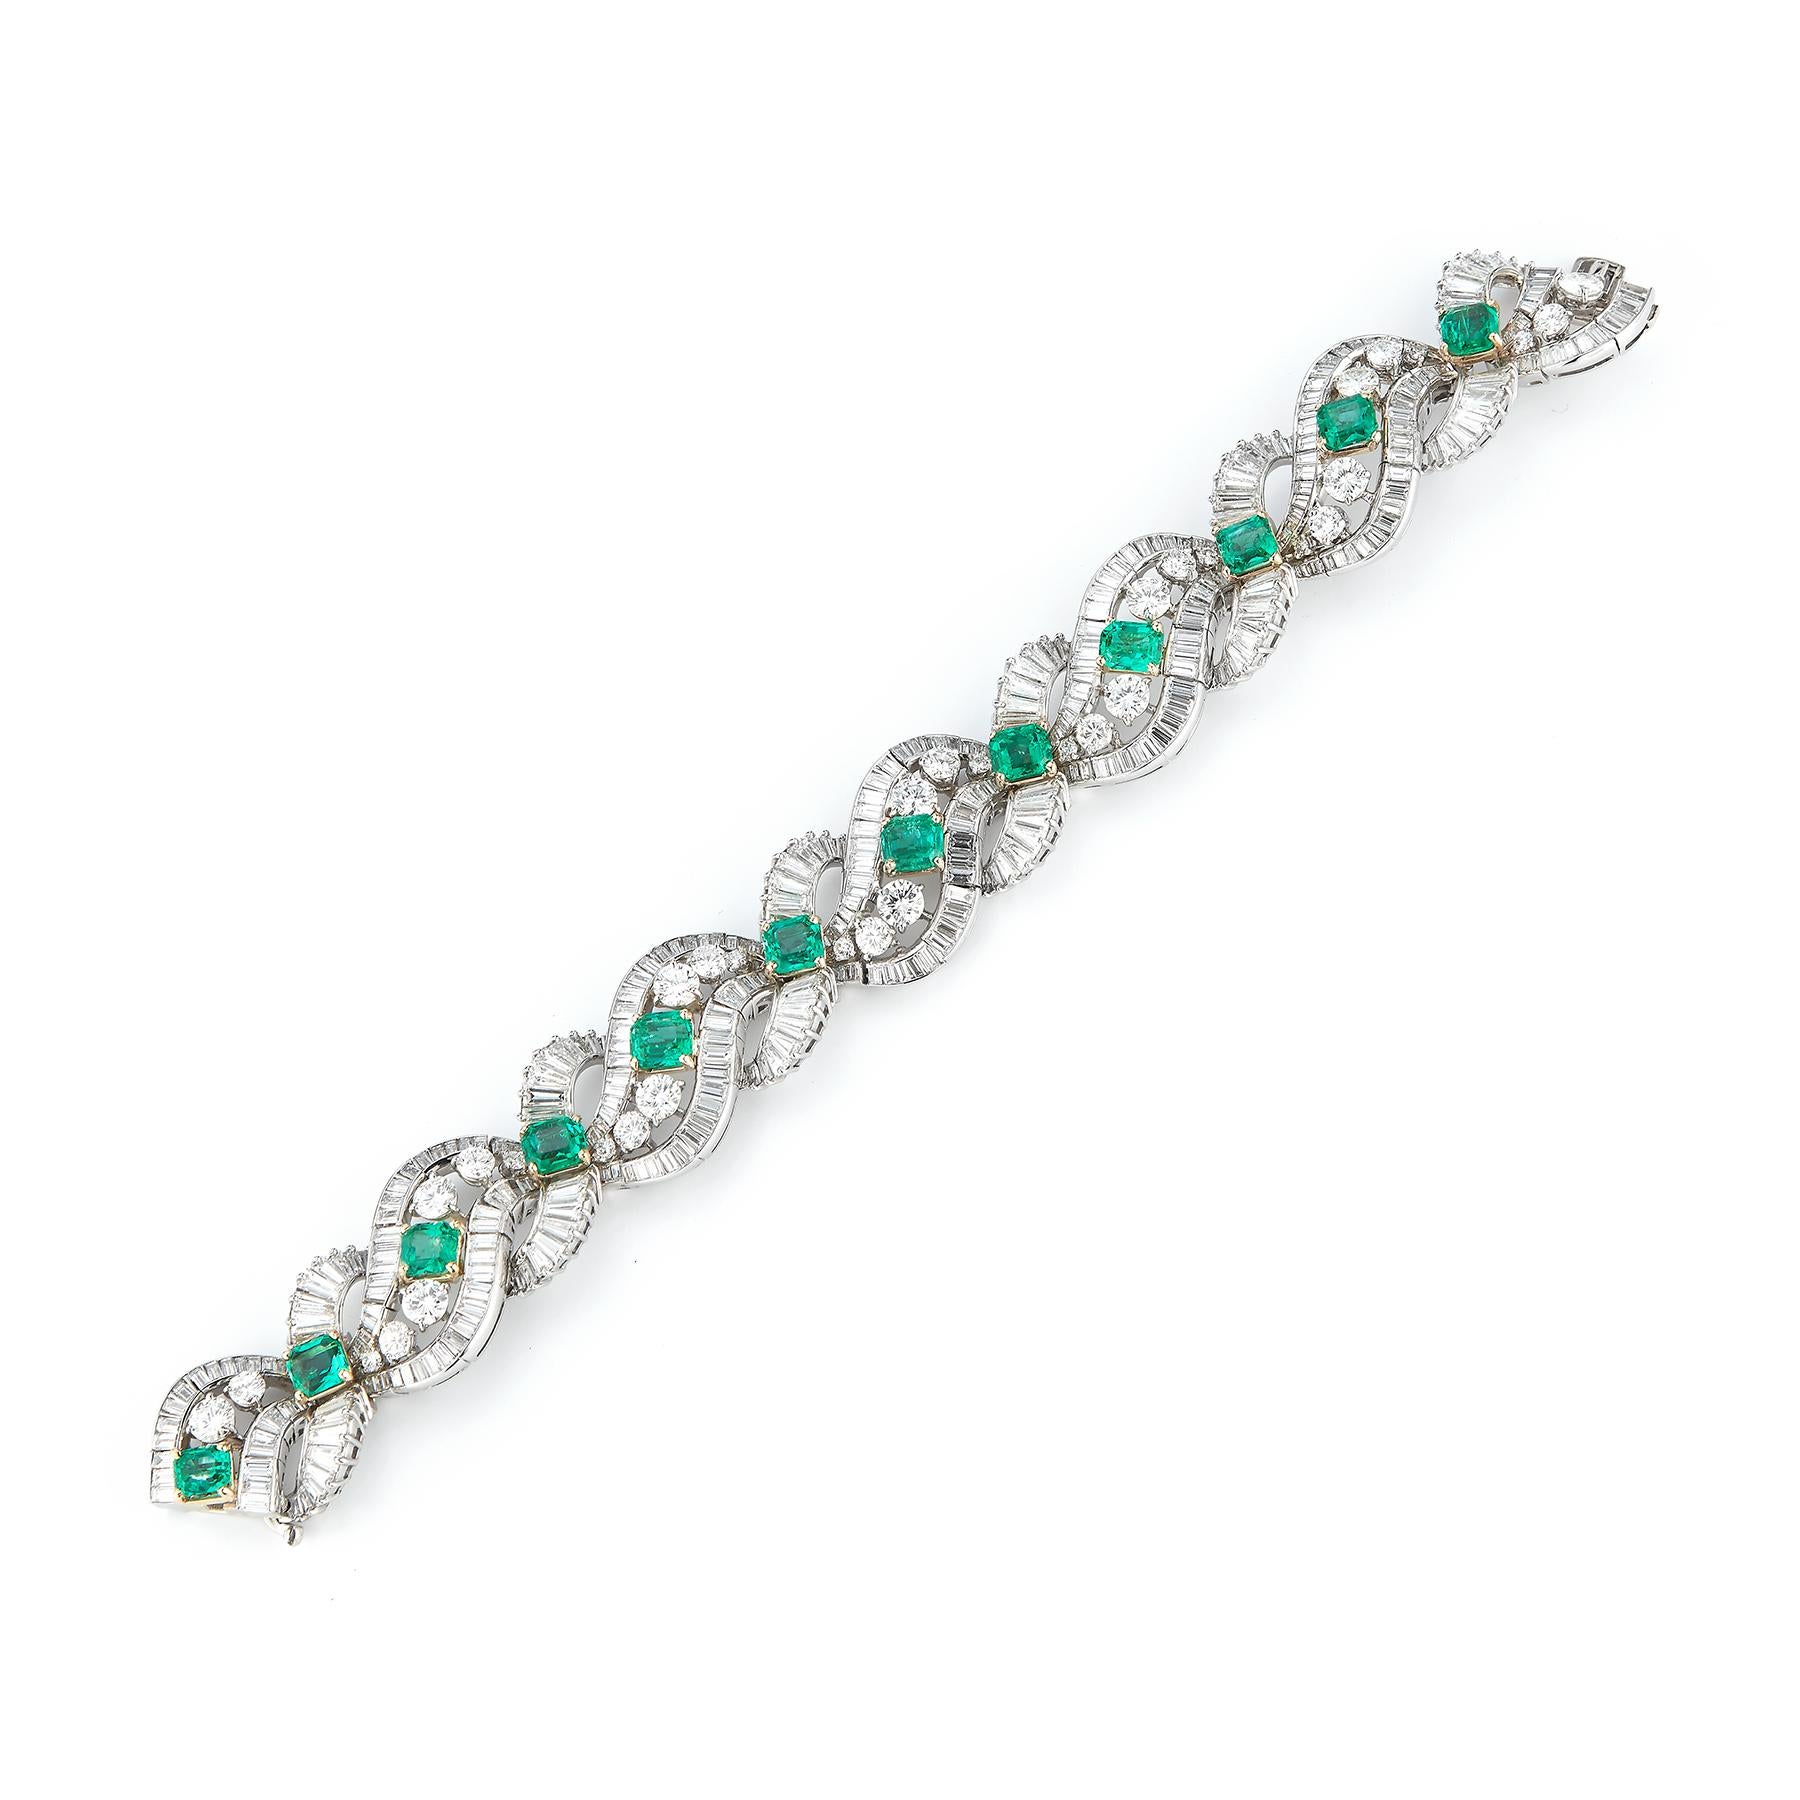 Bulgari Emerald & Diamond Bracelet, 12 emerald cut emeralds approximately 8.00 cts  surrounded by  372 baguette diamonds 72 round cut diamonds, s approximately 35.00 cts set in  white gold 

Measurements: 7.5